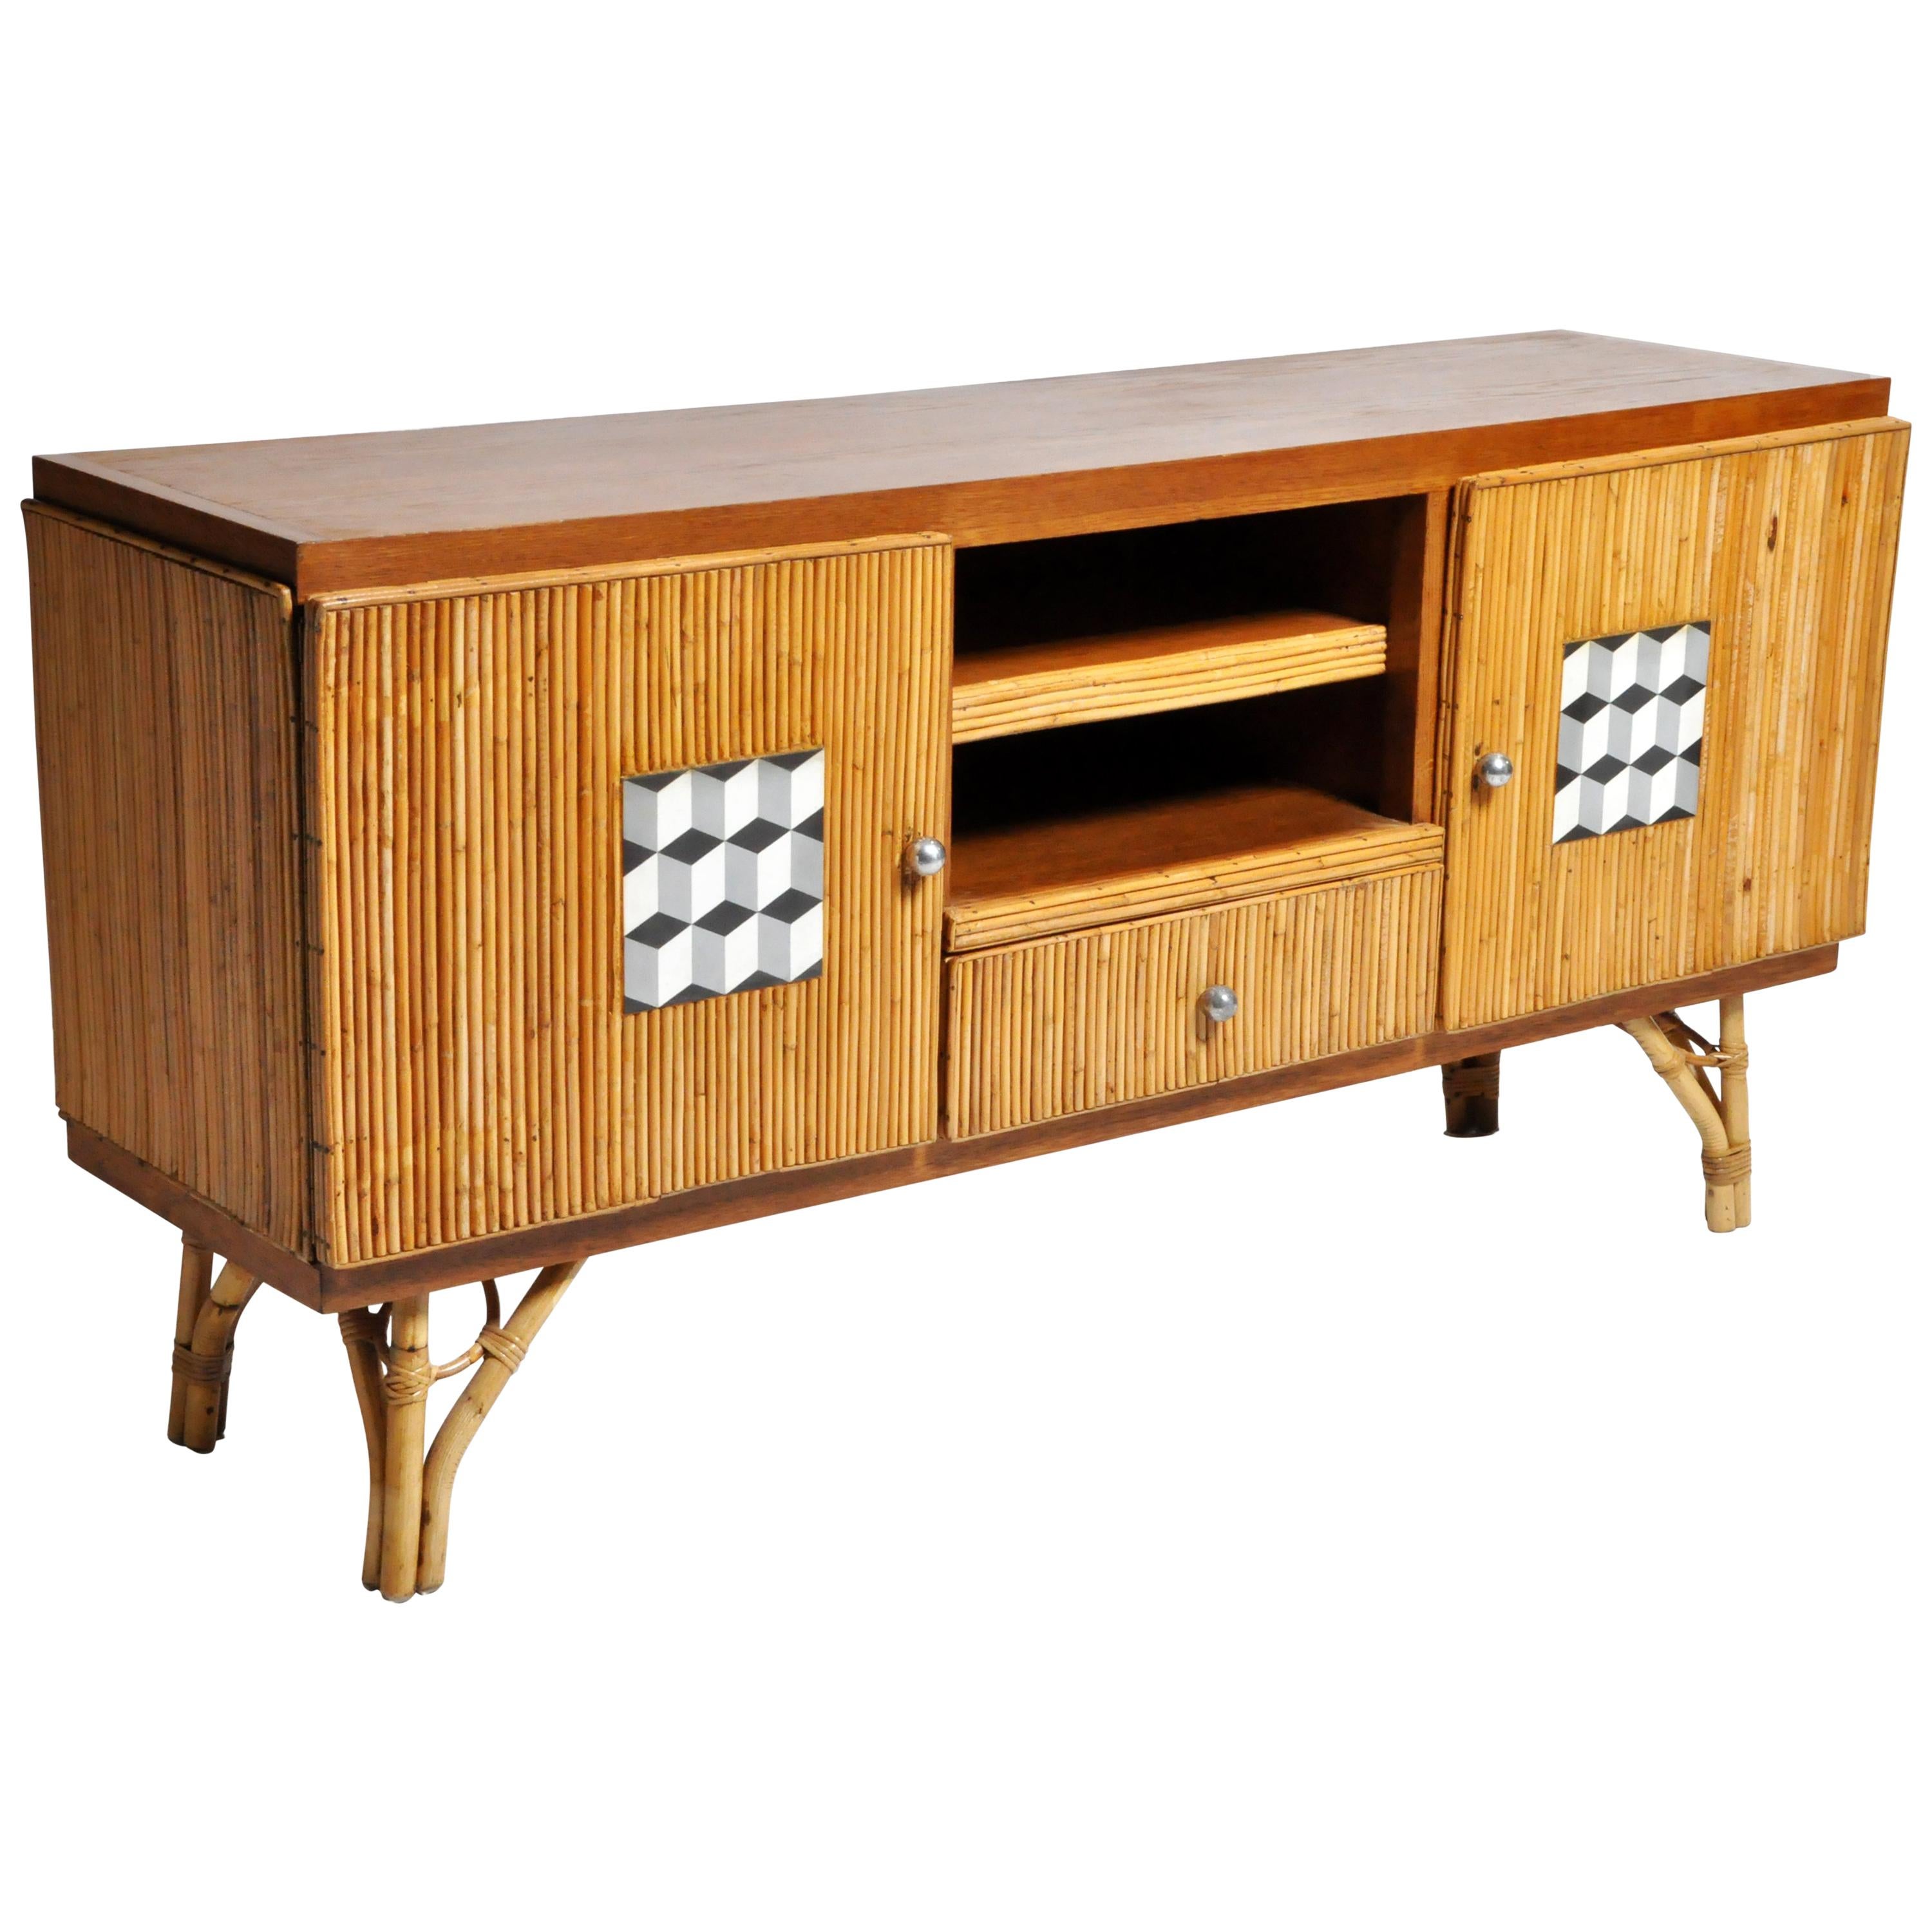 Bamboo and Rattan "French Riviera Style" Sideboard